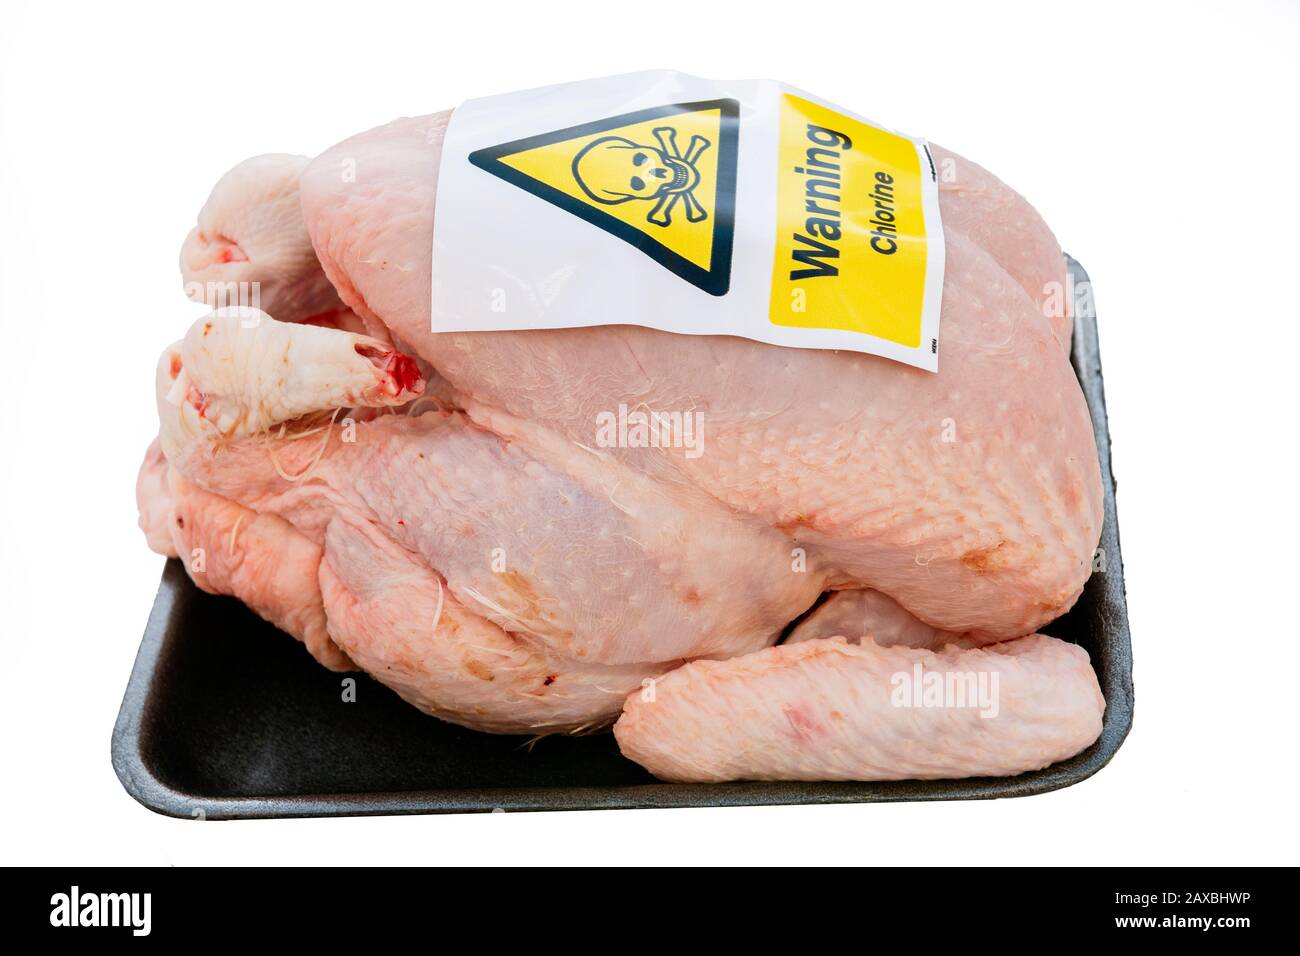 Chlorinated chicken concept, cut out or isolated on a white background. Chlorine warning sticker on a raw chicken, UK. Stock Photo